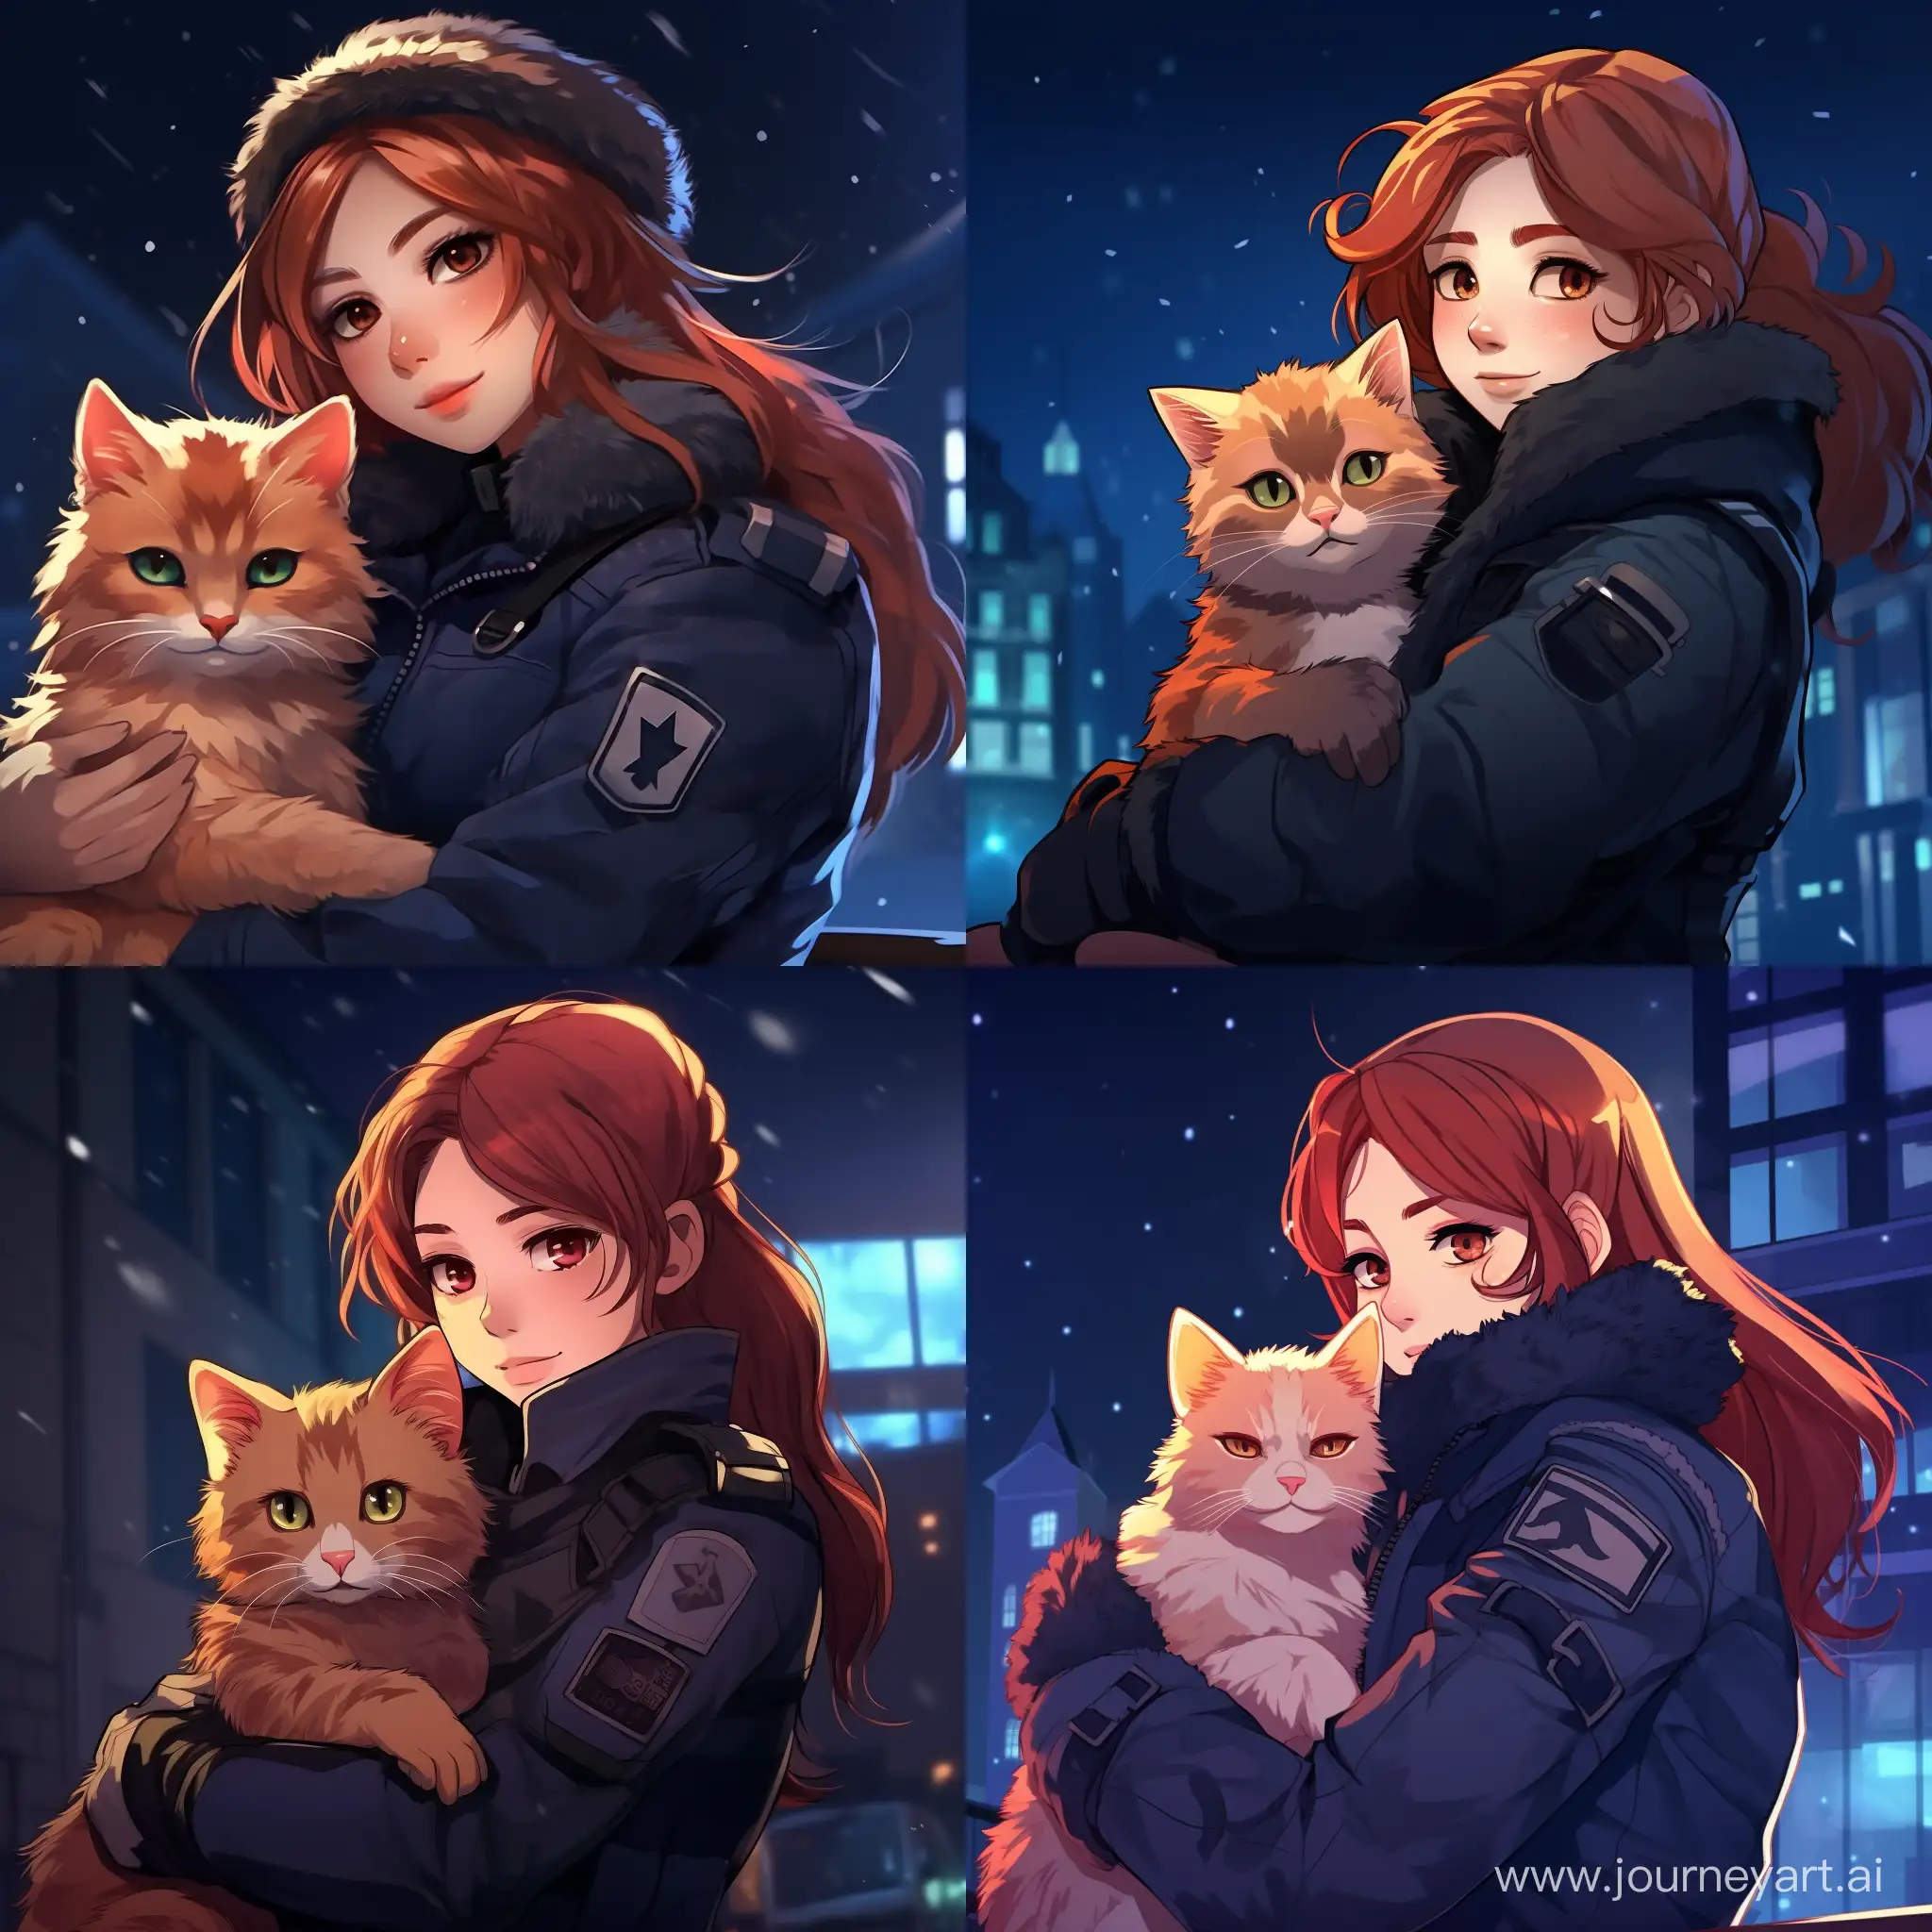 Cinematic-Anime-Winter-Night-RedHaired-Police-Officer-with-Cat